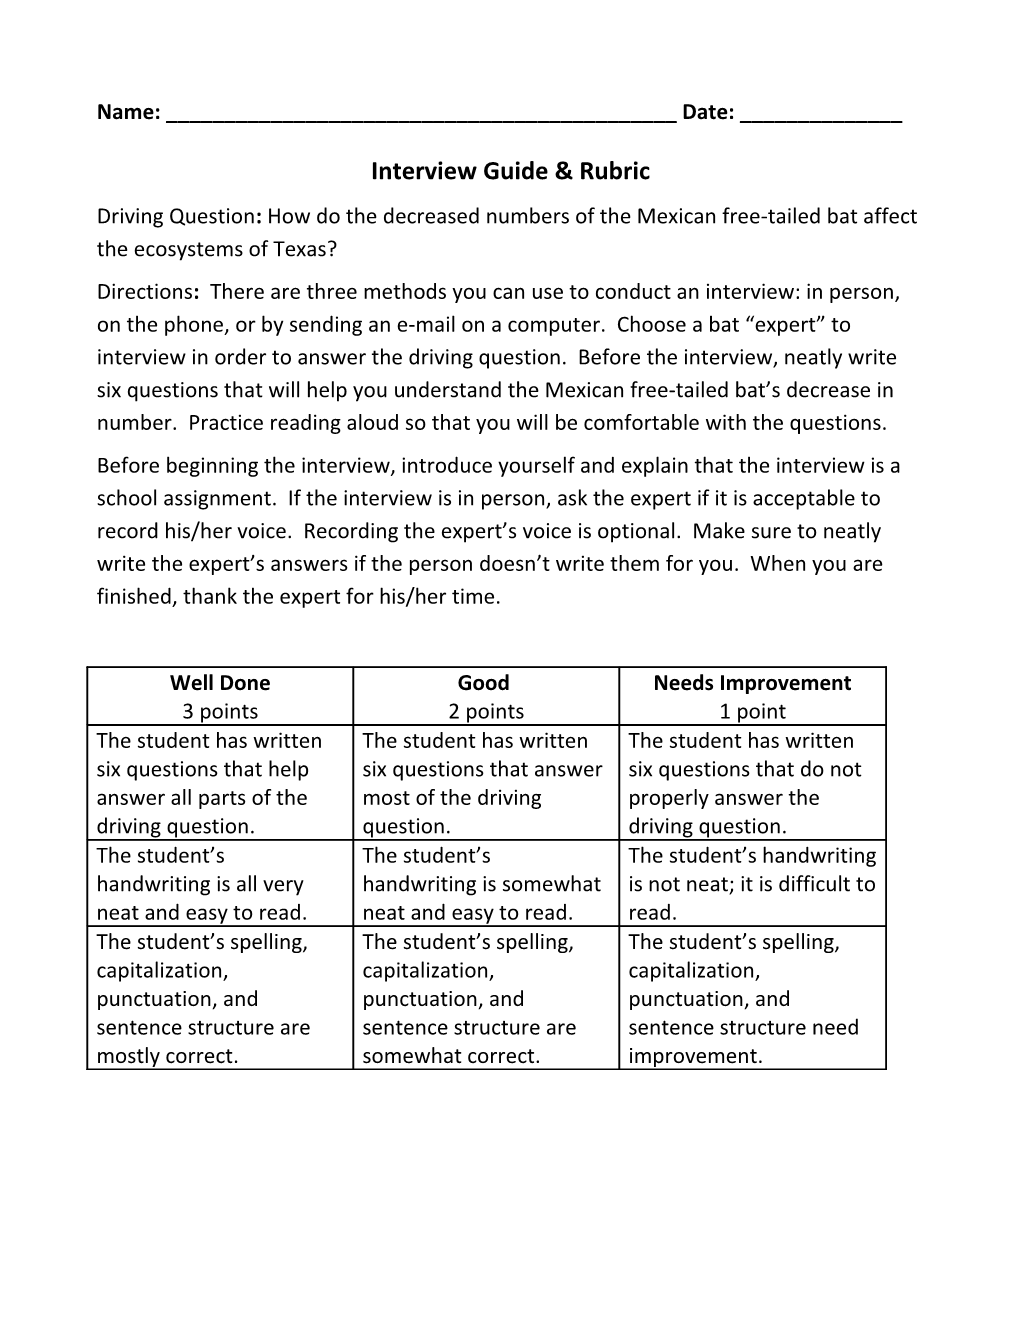 Interview Guide & Rubric